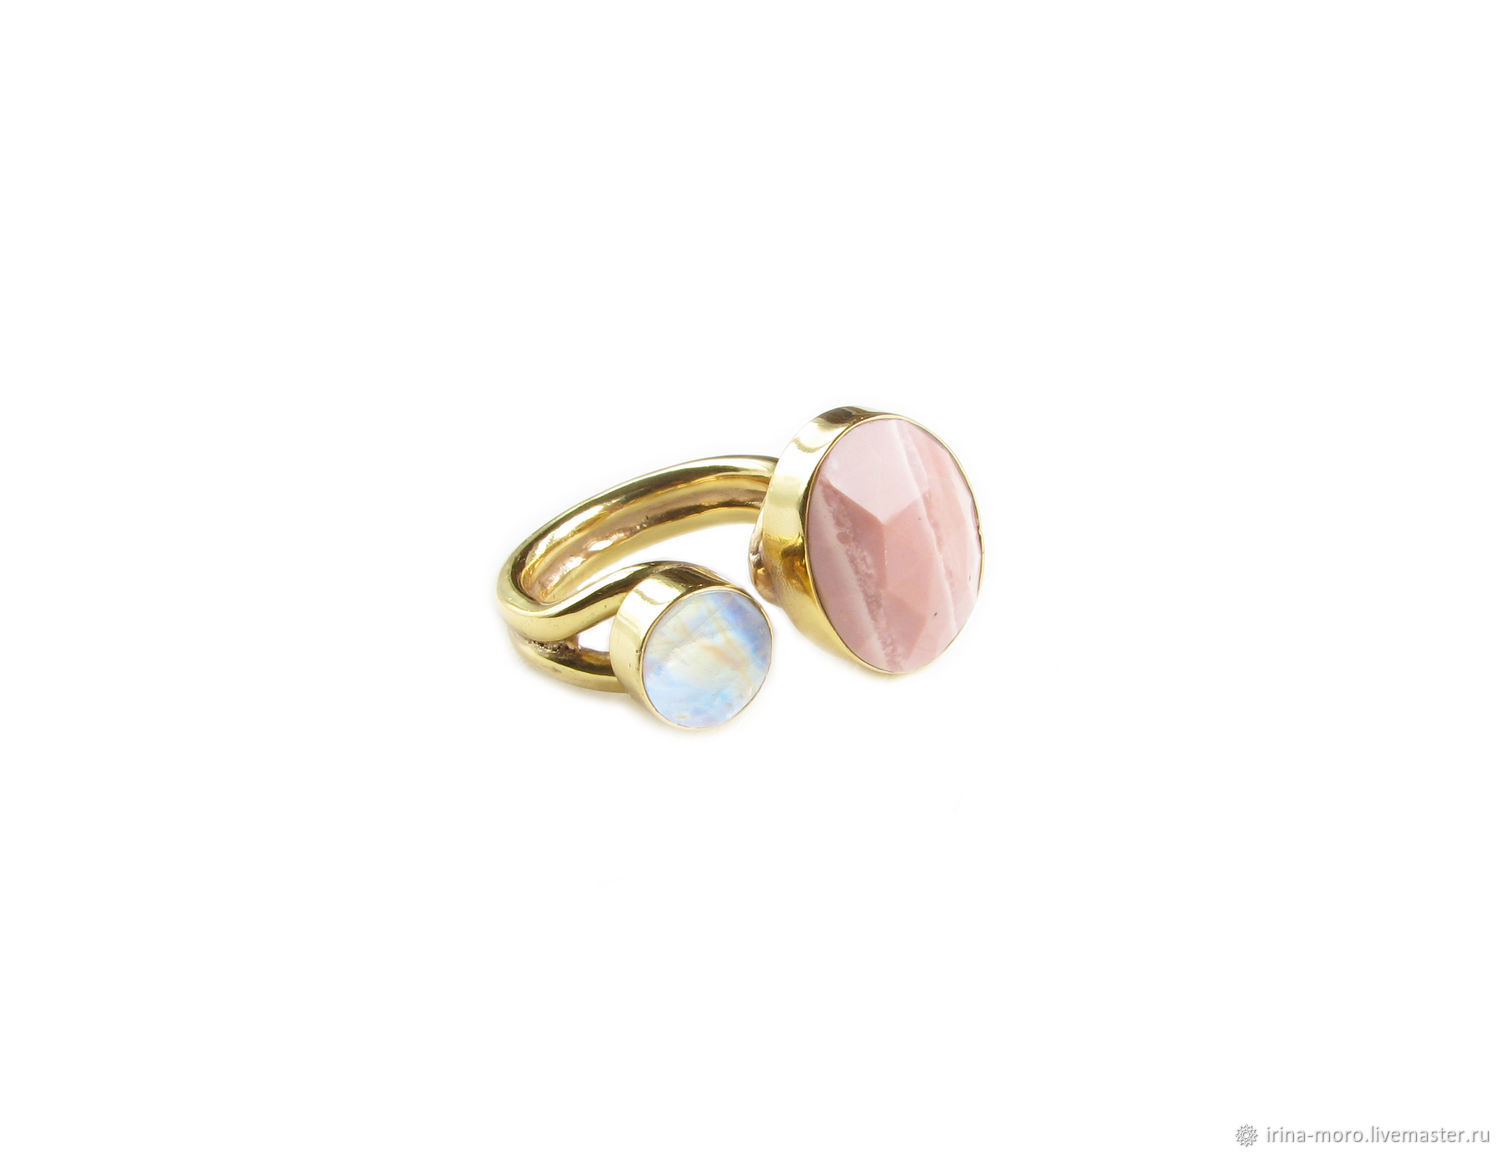 Gold ring with moonstone and rhodochrosite, large pink ring, Rings, Moscow,  Фото №1